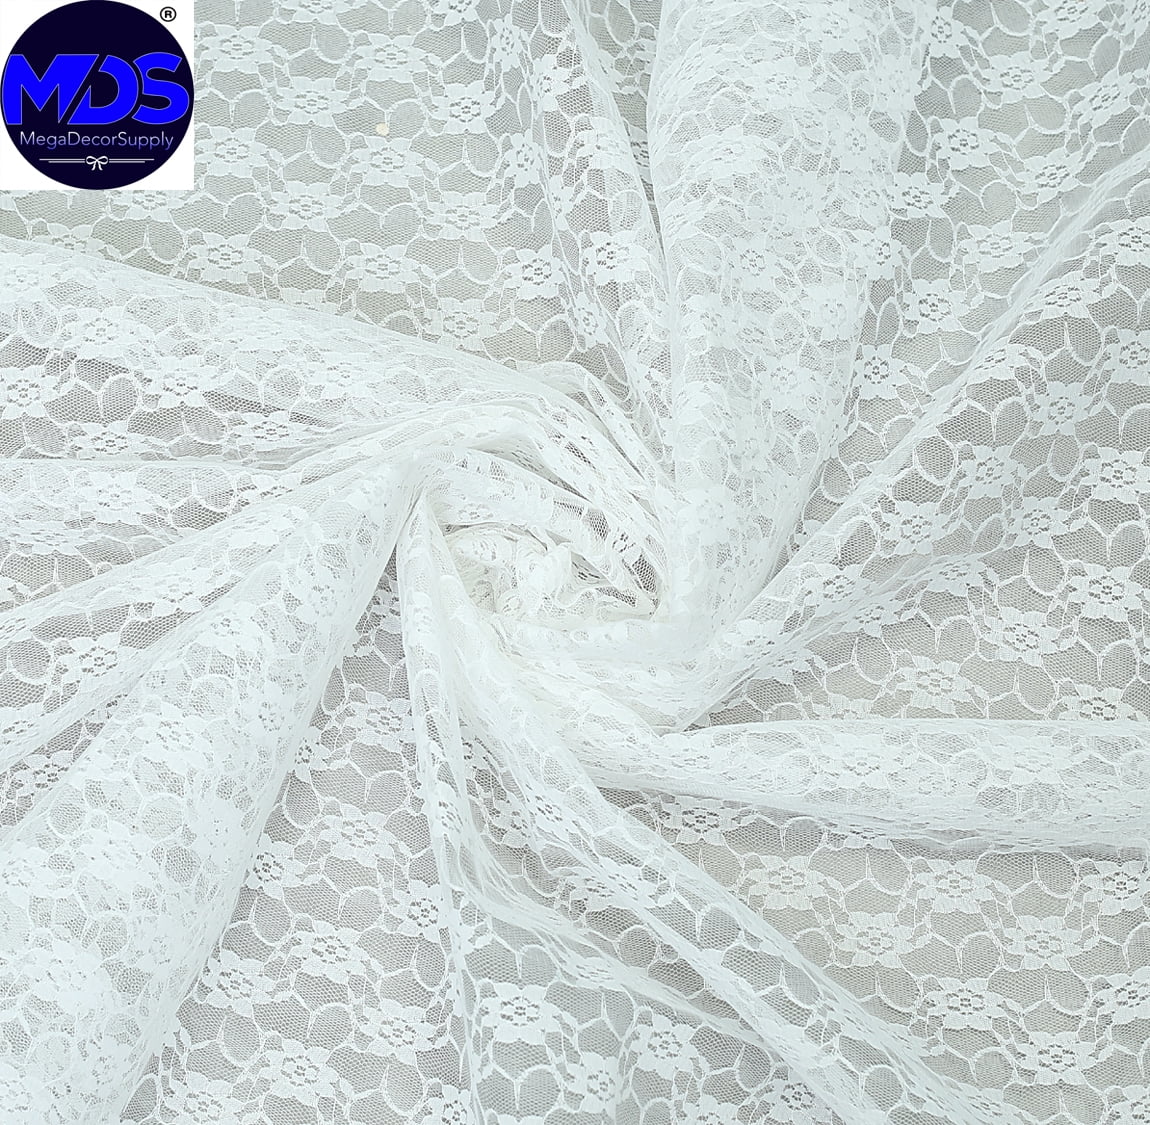 1M Embroidered Lace Floral Fabric Material DIY Wedding Dress Curtain Decor Trims